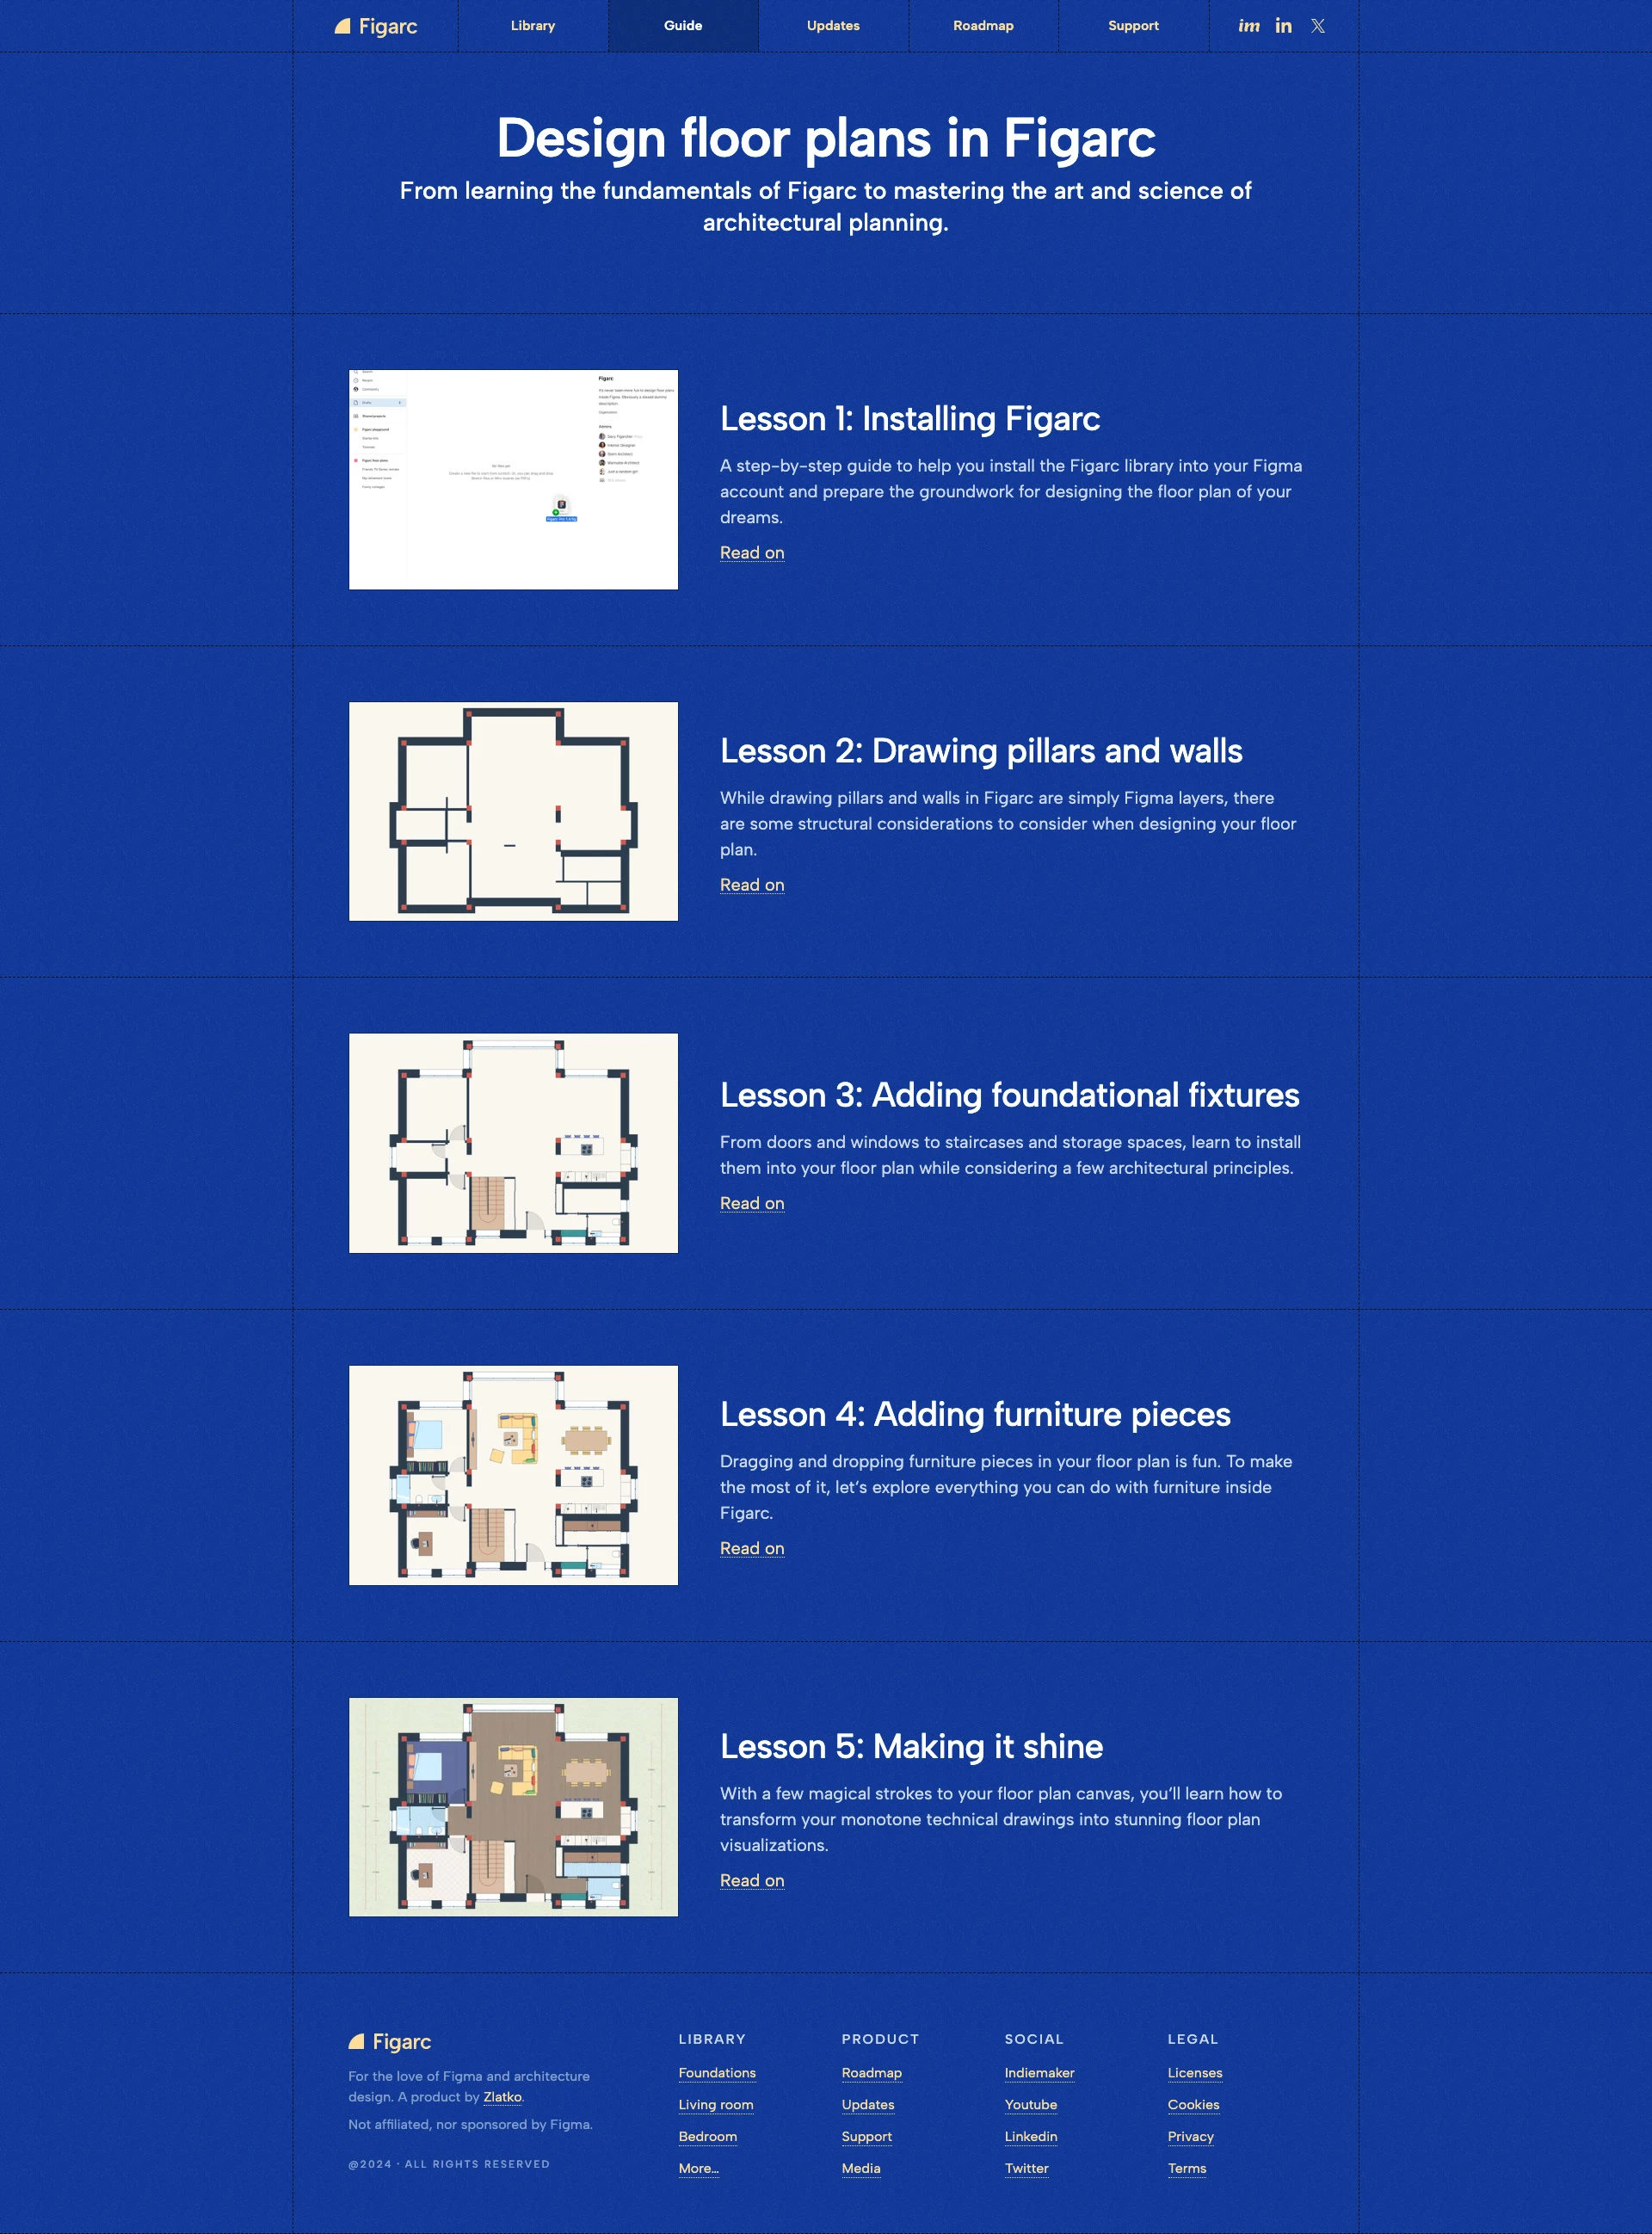 Figarc Landing Page Example: A design system, but for floor plans. Now you can apply your Figma superpowers to something you always secretly wanted — designing homes and offices. Because why wrestle learning Autocad or Archicad when you can be an architect in your favorite software? So, if you know Figma already, you already know Figarc. That almost sounded like a palindrome.